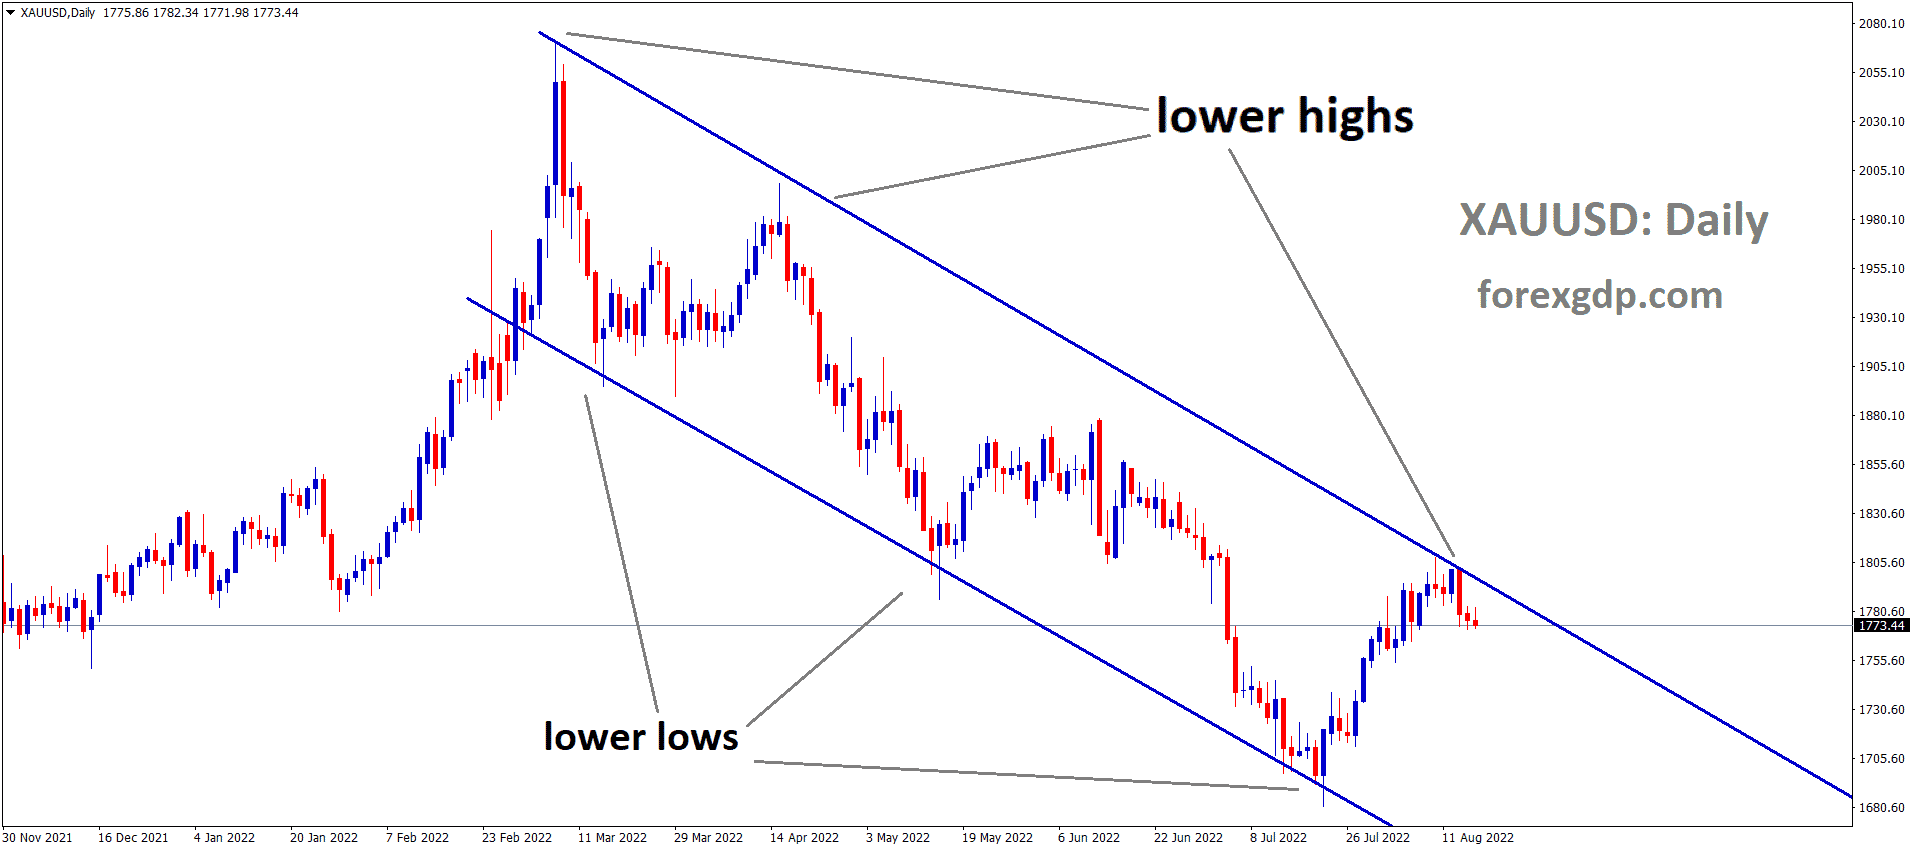 XAUUSD Gold price is moving in the Descending channel and the Market has fallen from the Lower high area of the channel.